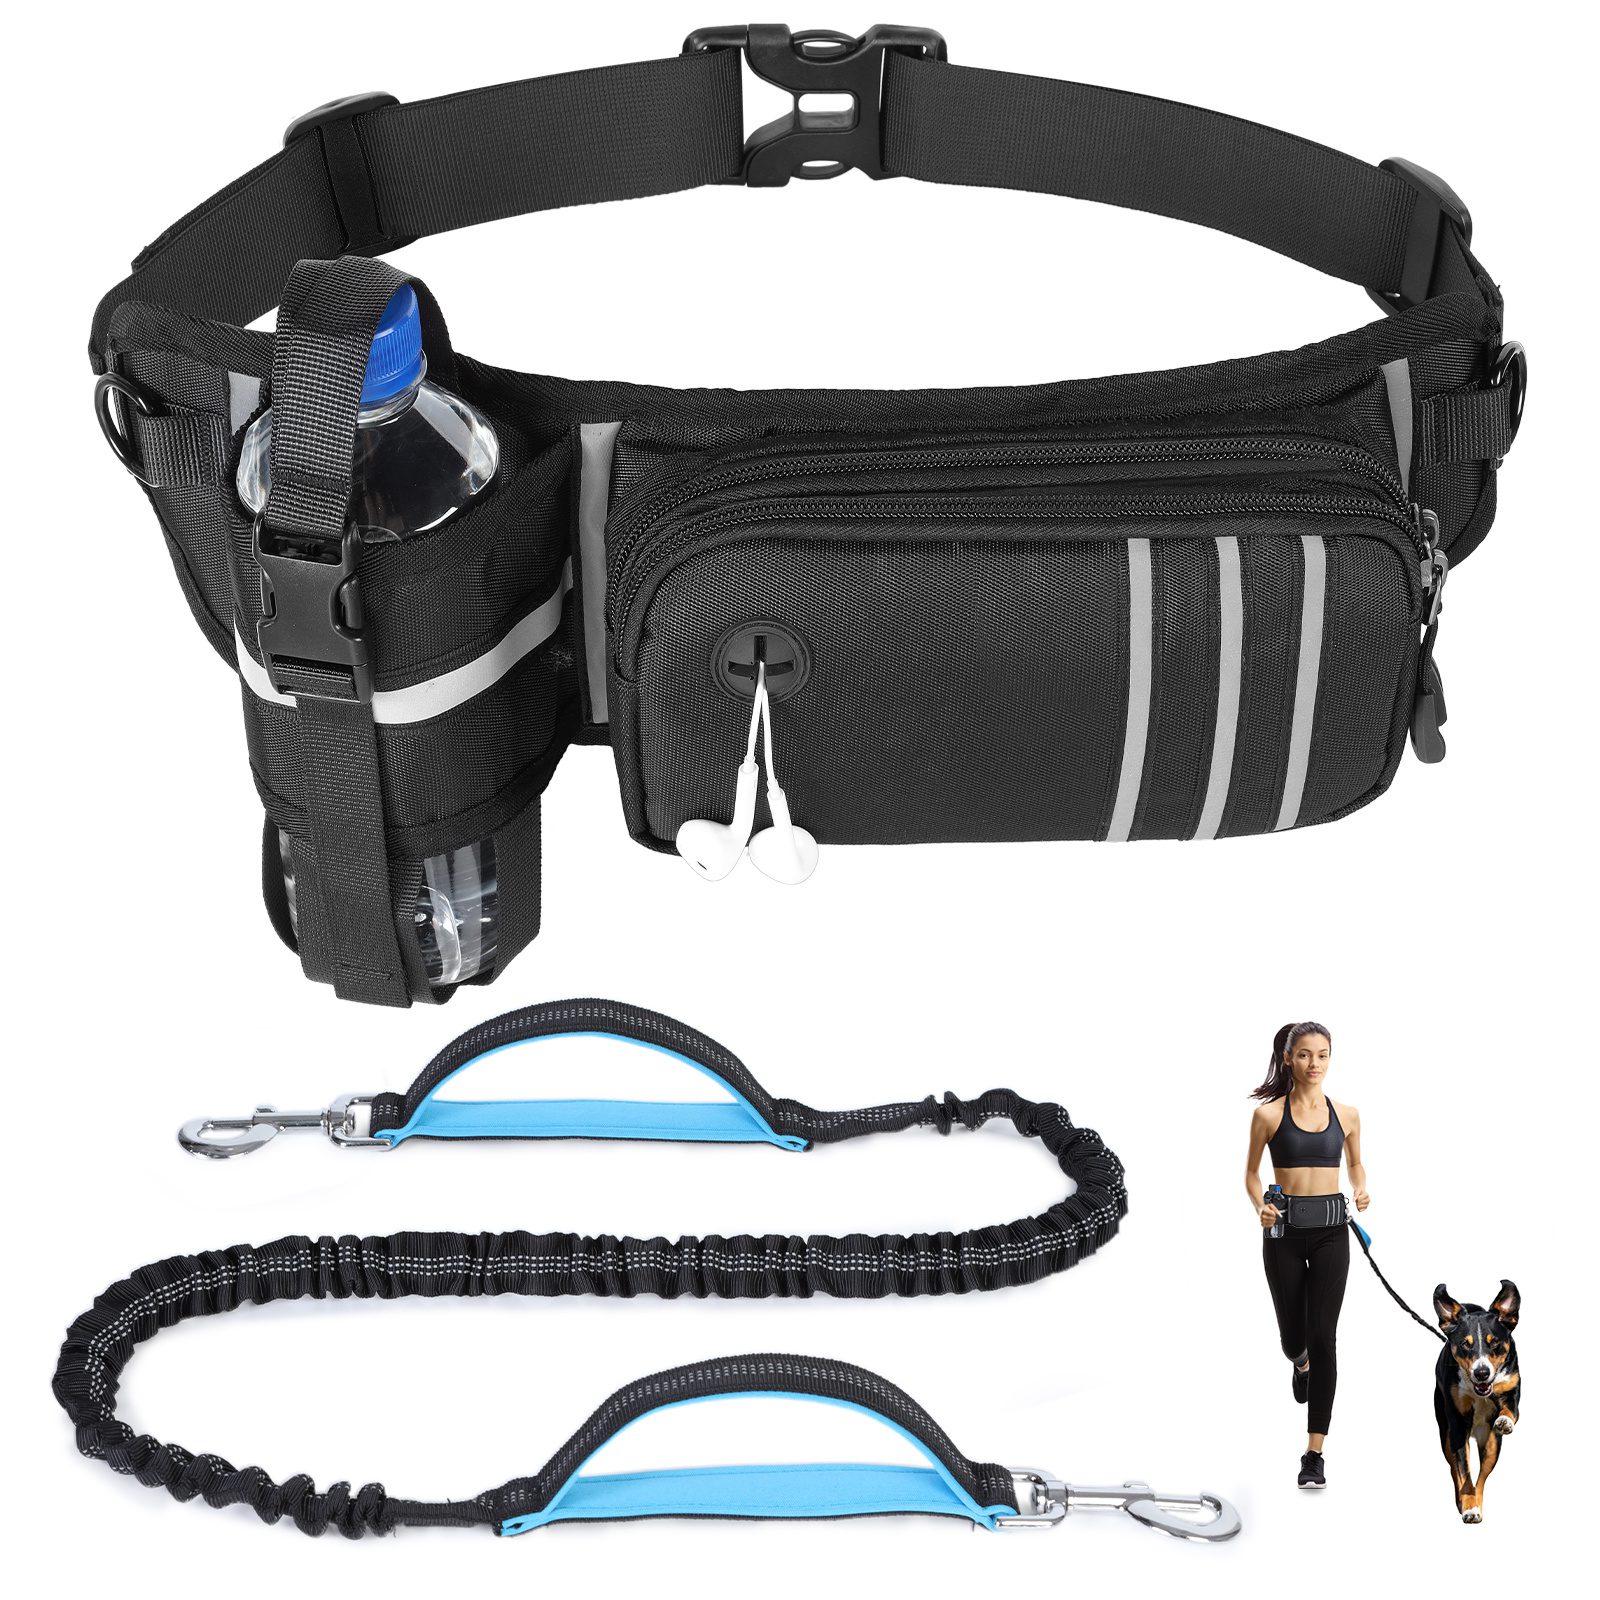 Running and Hiking Bundle and No Pull Dog Harness with Removable Belt Pouches 2 Items: Hands Free Dog Leash Large for Walking 